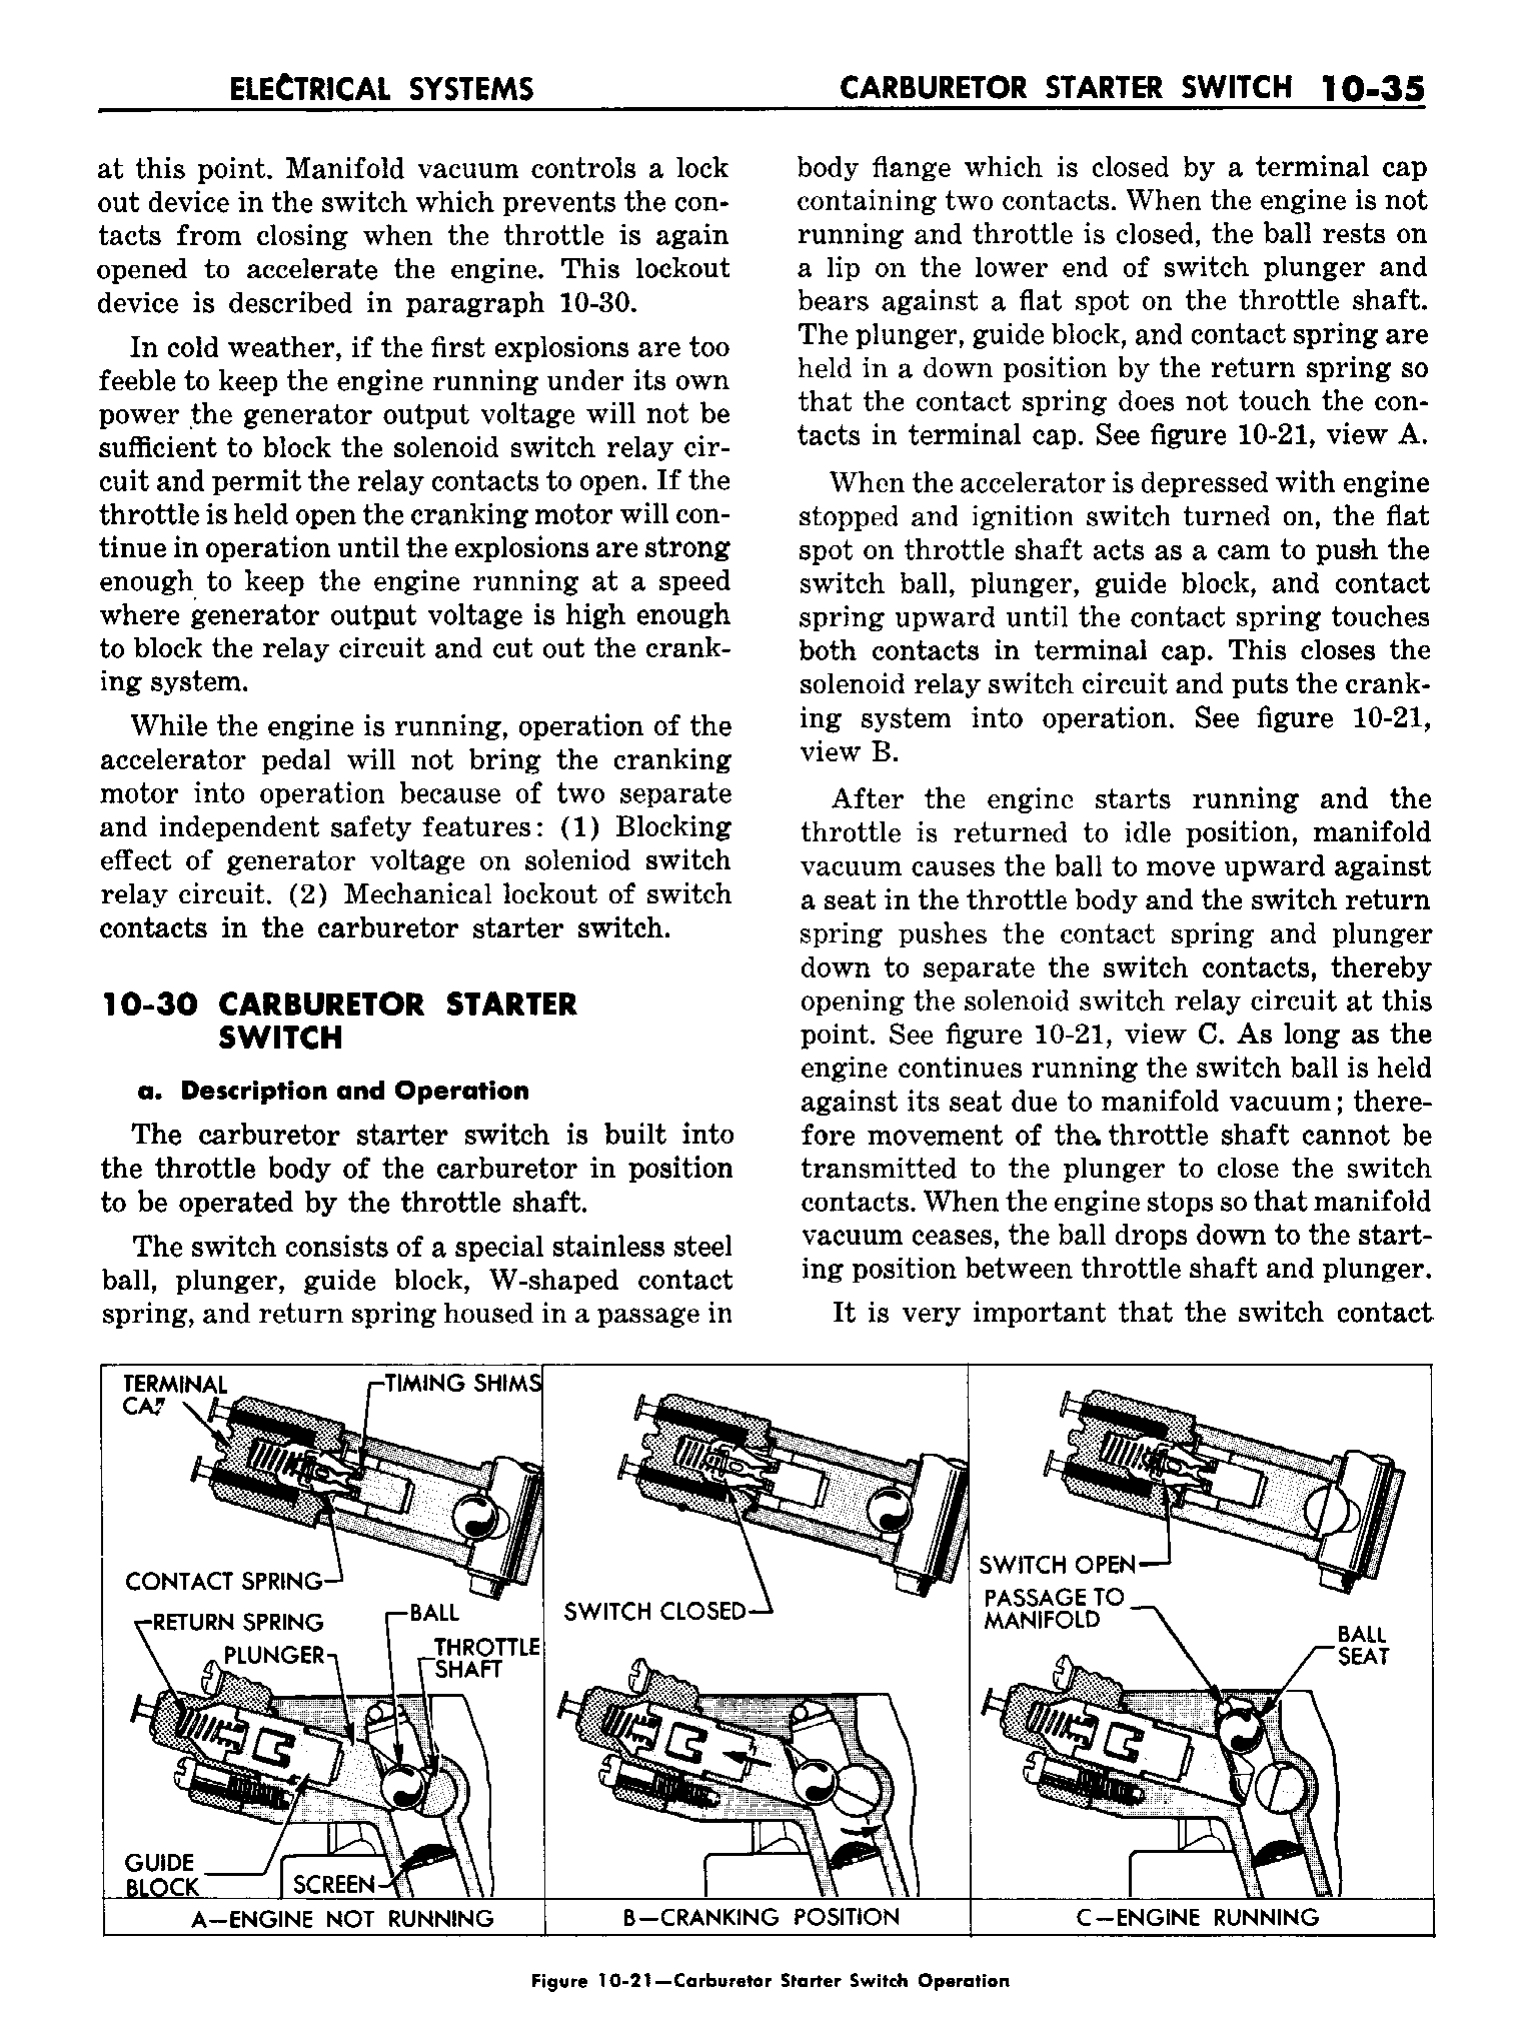 n_11 1958 Buick Shop Manual - Electrical Systems_35.jpg